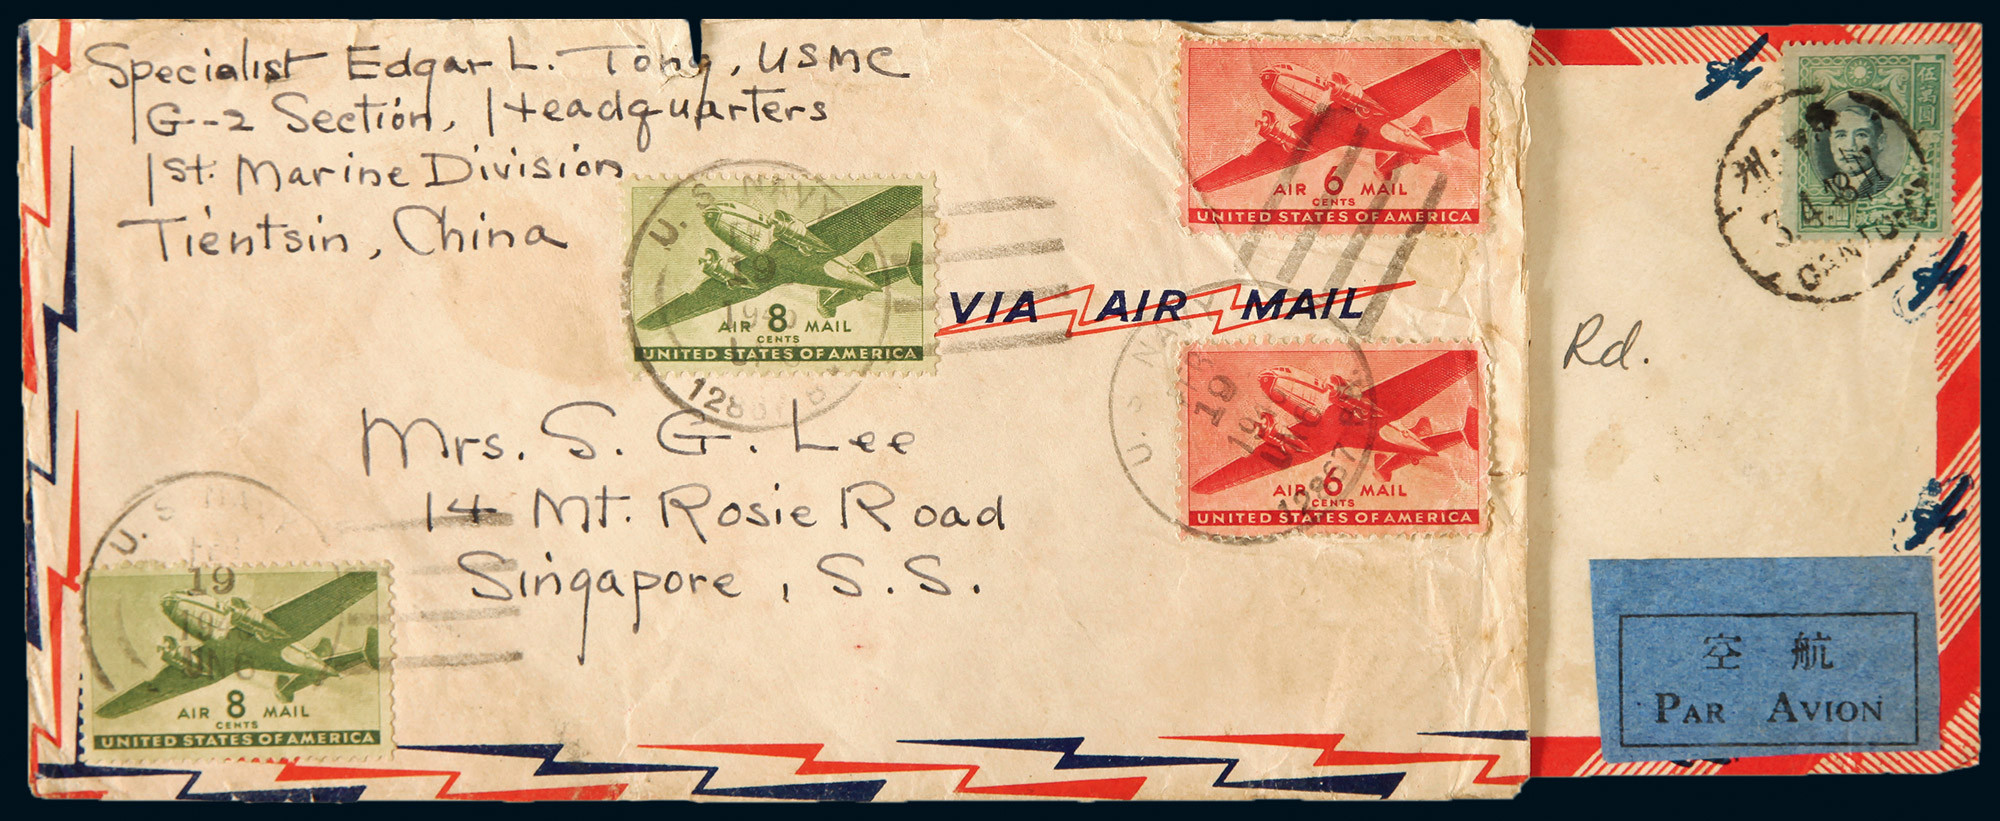 Group of 2 covers sent to Singapore. nice condition